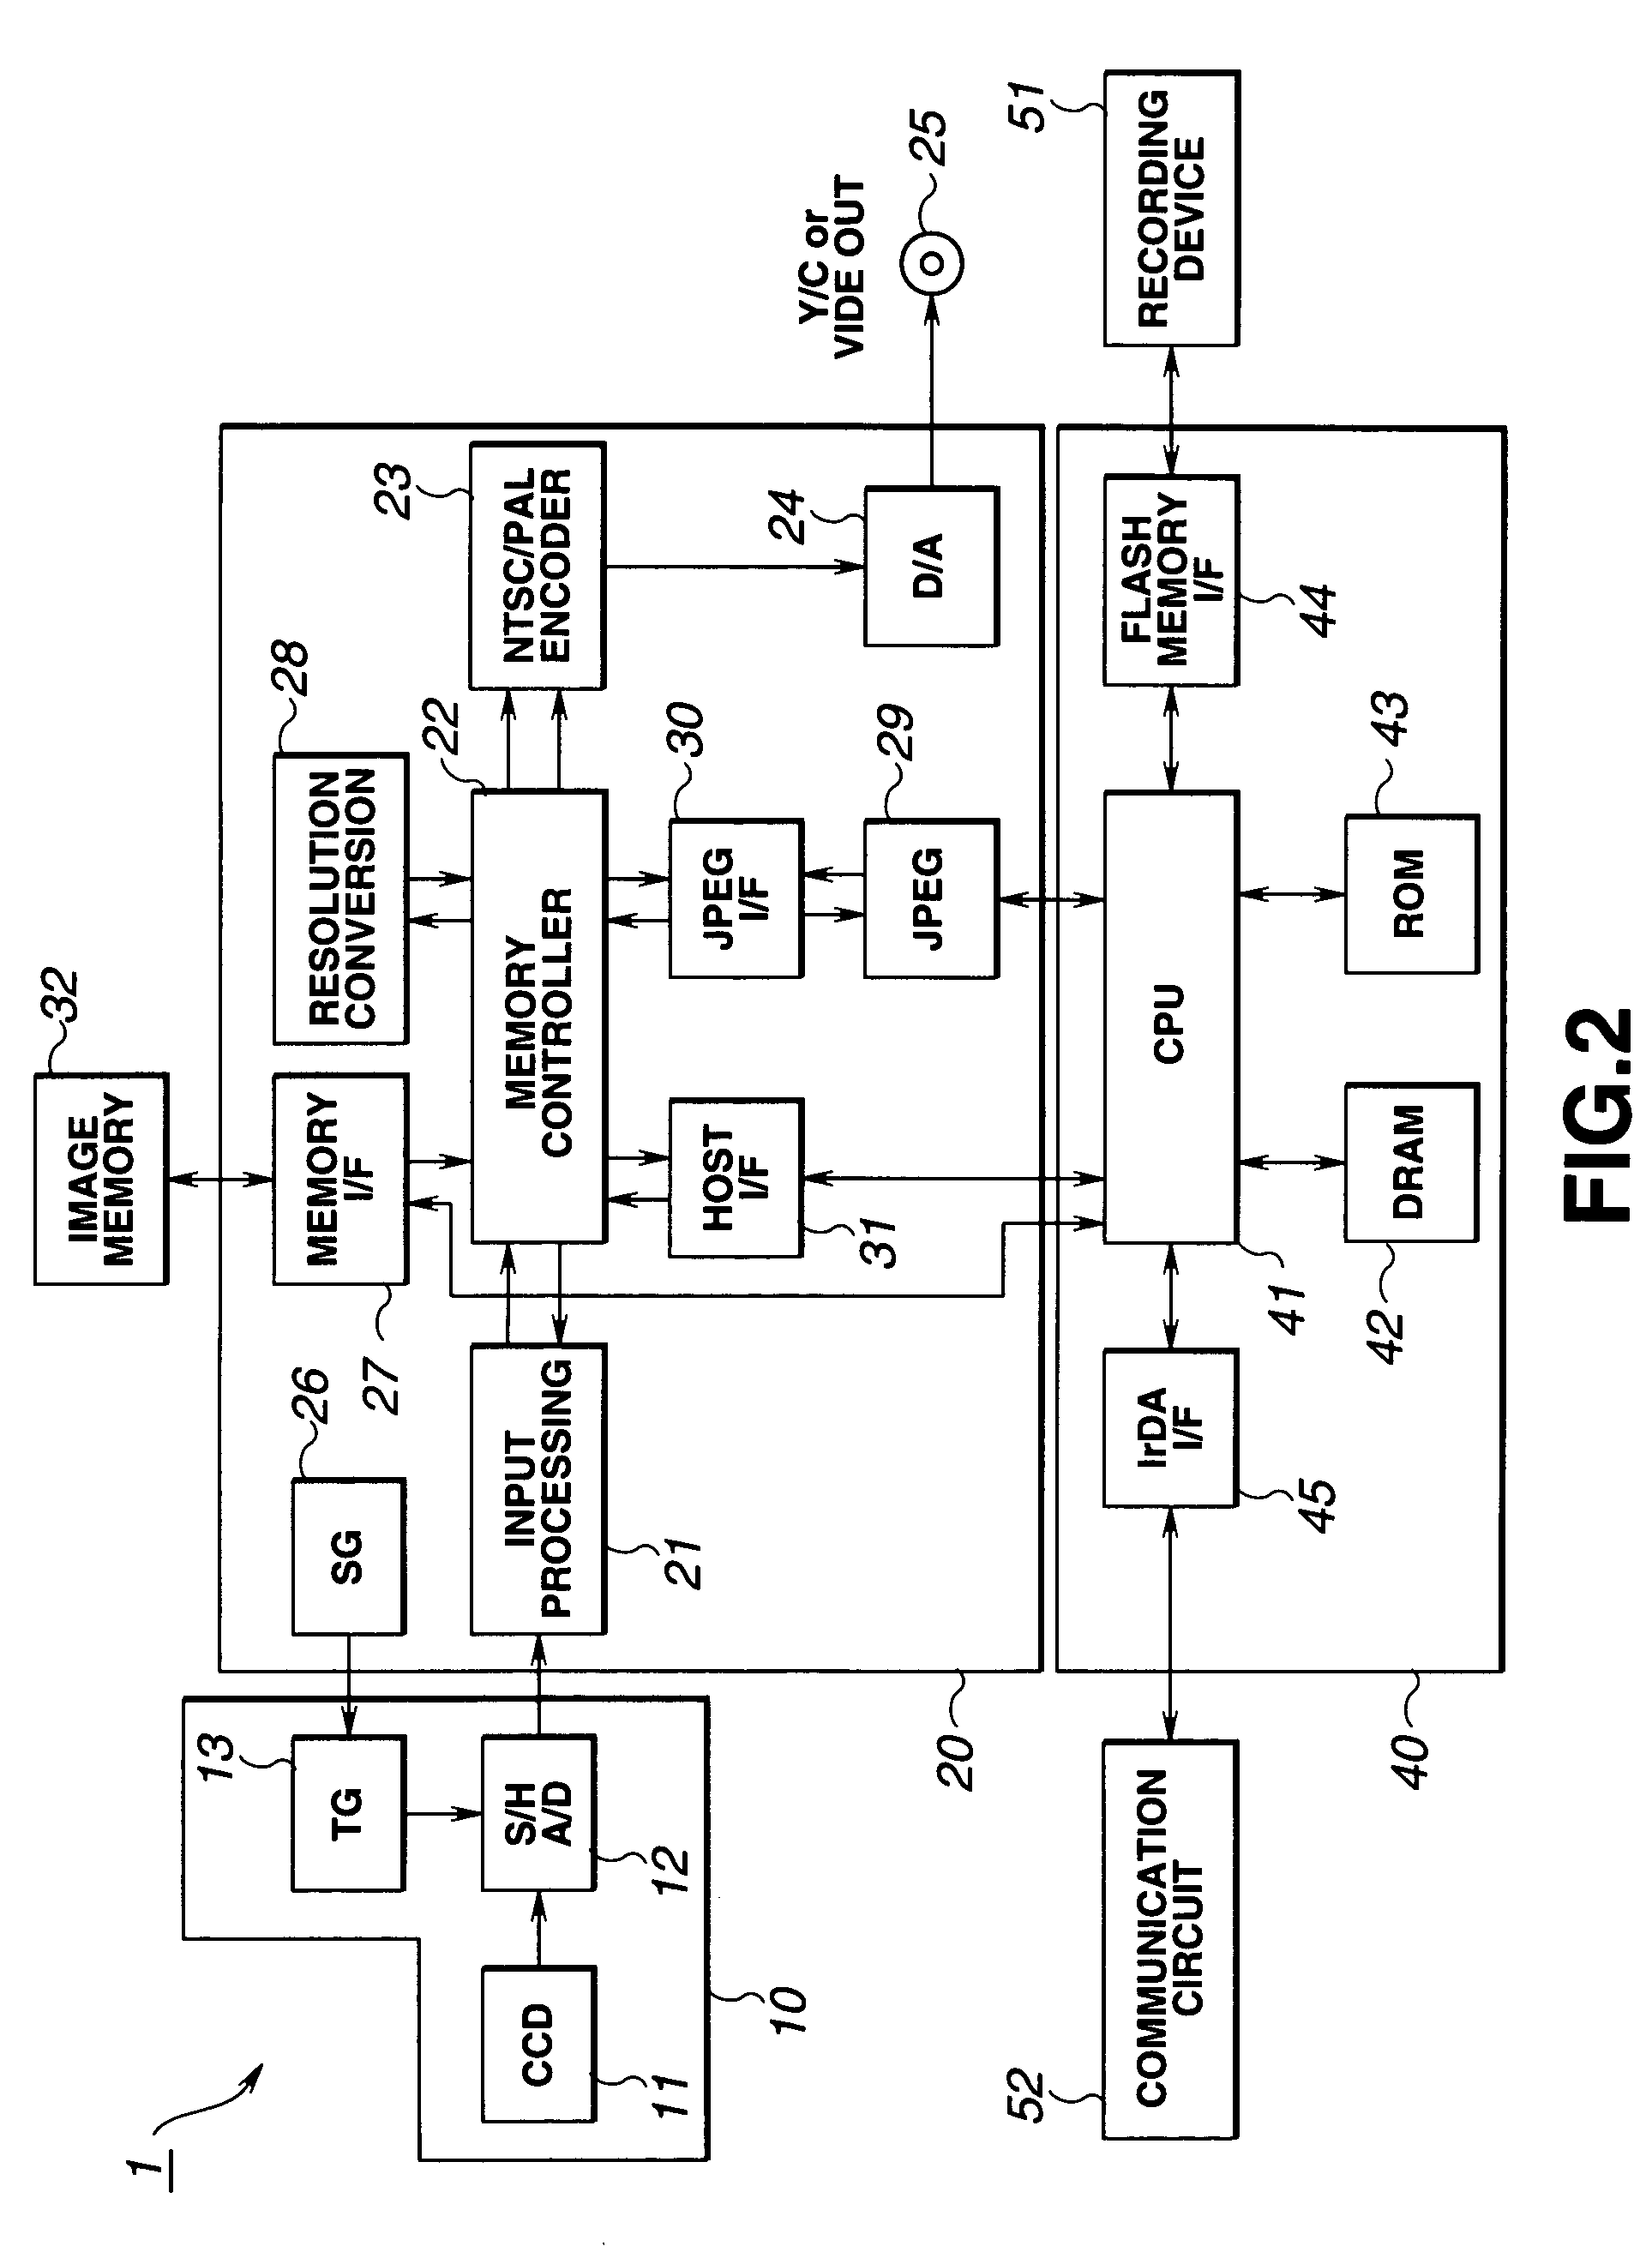 Imaging apparatus with delay and processor to weight lines of delayed image data